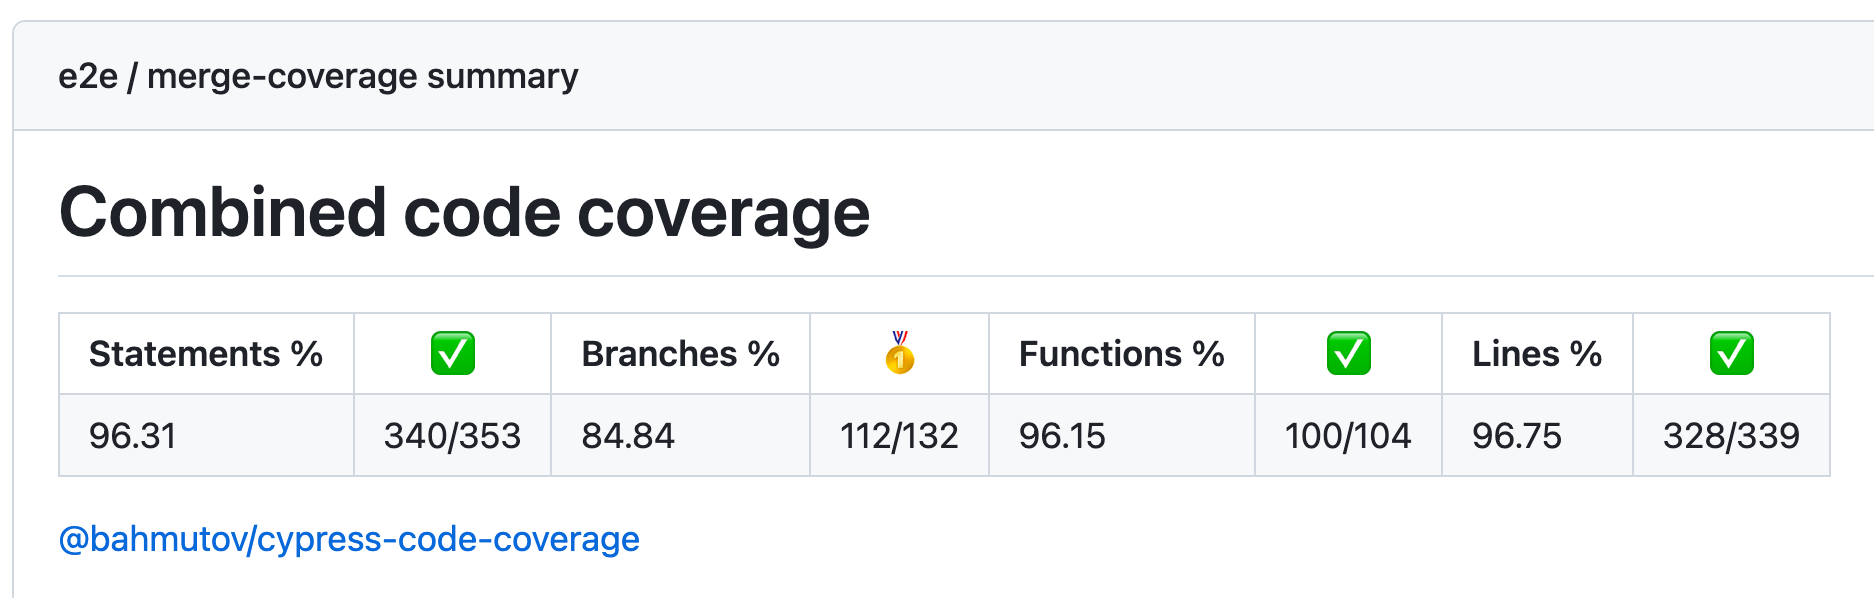 Combined code coverage summary